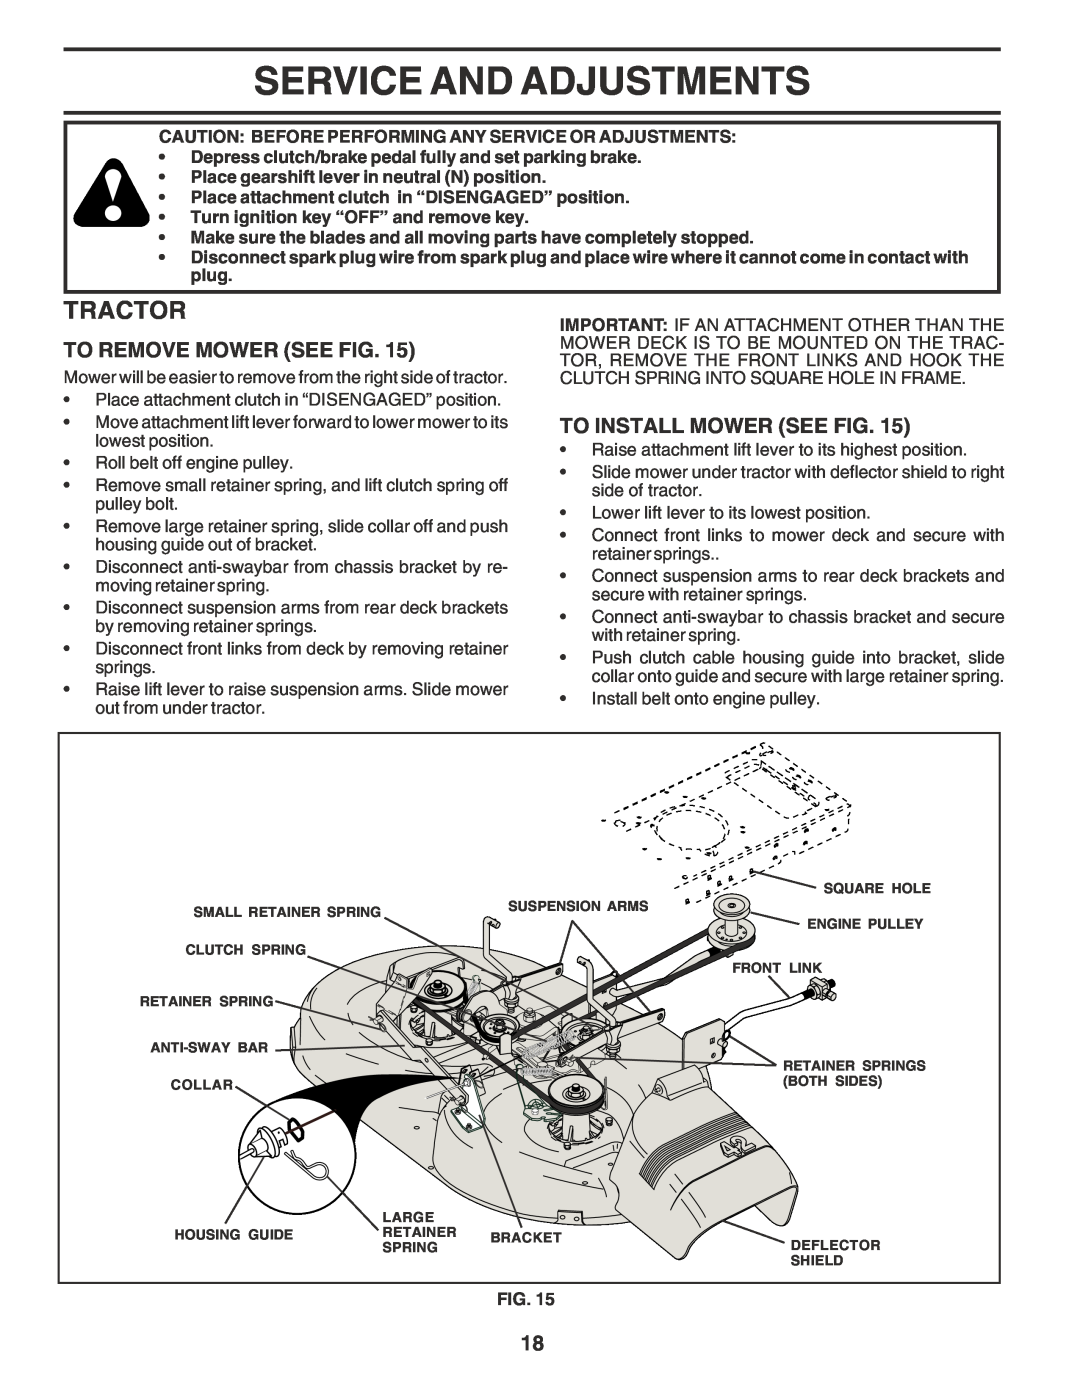 Poulan PR17542STA owner manual Service And Adjustments, To Remove Mower See Fig, To Install Mower See Fig, Tractor 